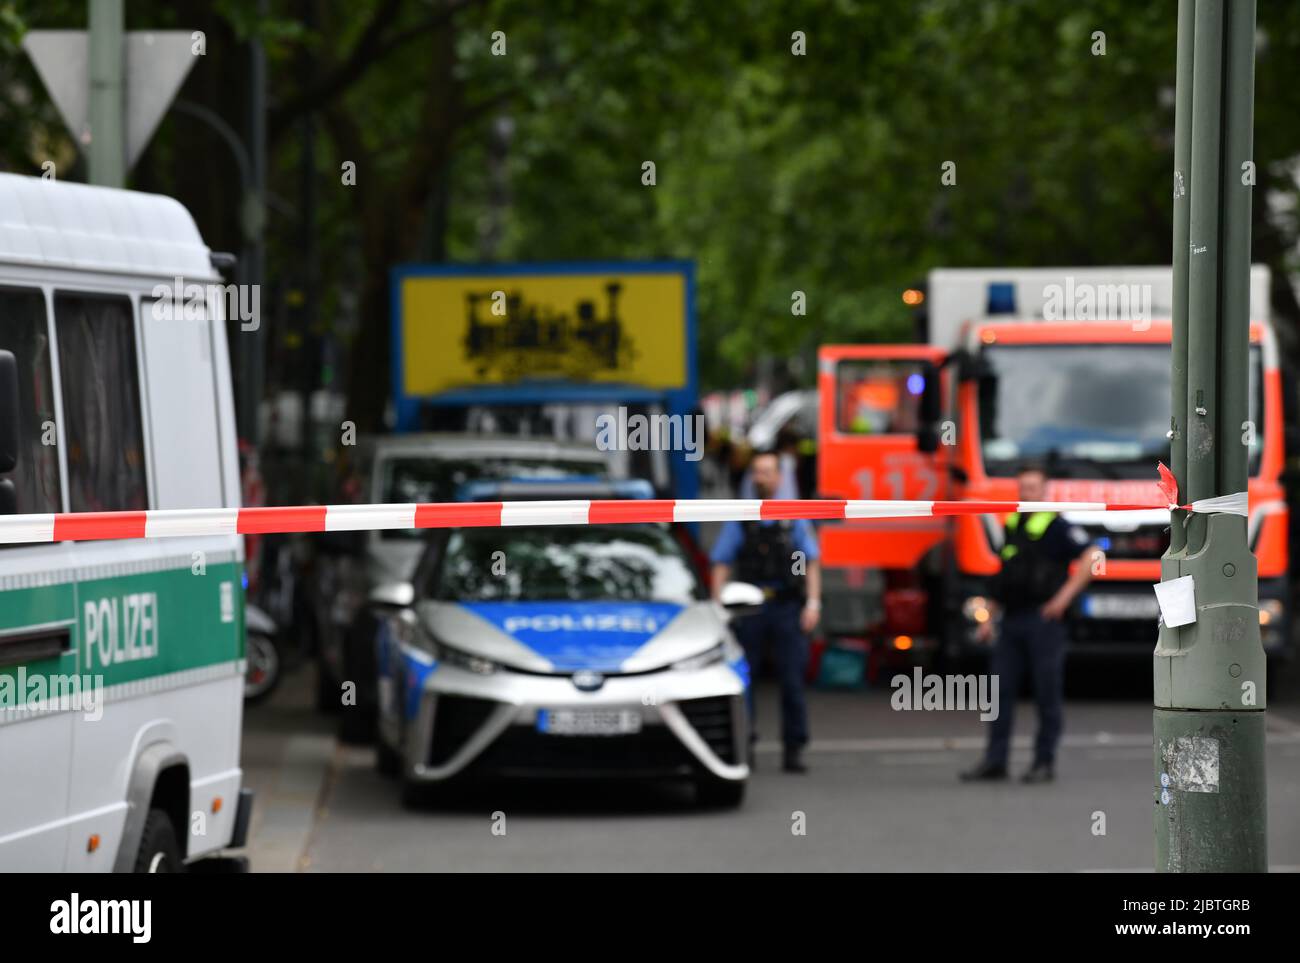 Berlin, Germany. 8th June, 2022. Police stand guard at the scene after a vehicle crashed into a crowd in Berlin, Germany, June 8, 2022. A vehicle crashed into a crowd of people in Berlin's Charlottenburg locality, leaving one person killed and more than a dozen injured, German news agency dpa reported on Wednesday. Credit: Ren Pengfei/Xinhua/Alamy Live News Stock Photo